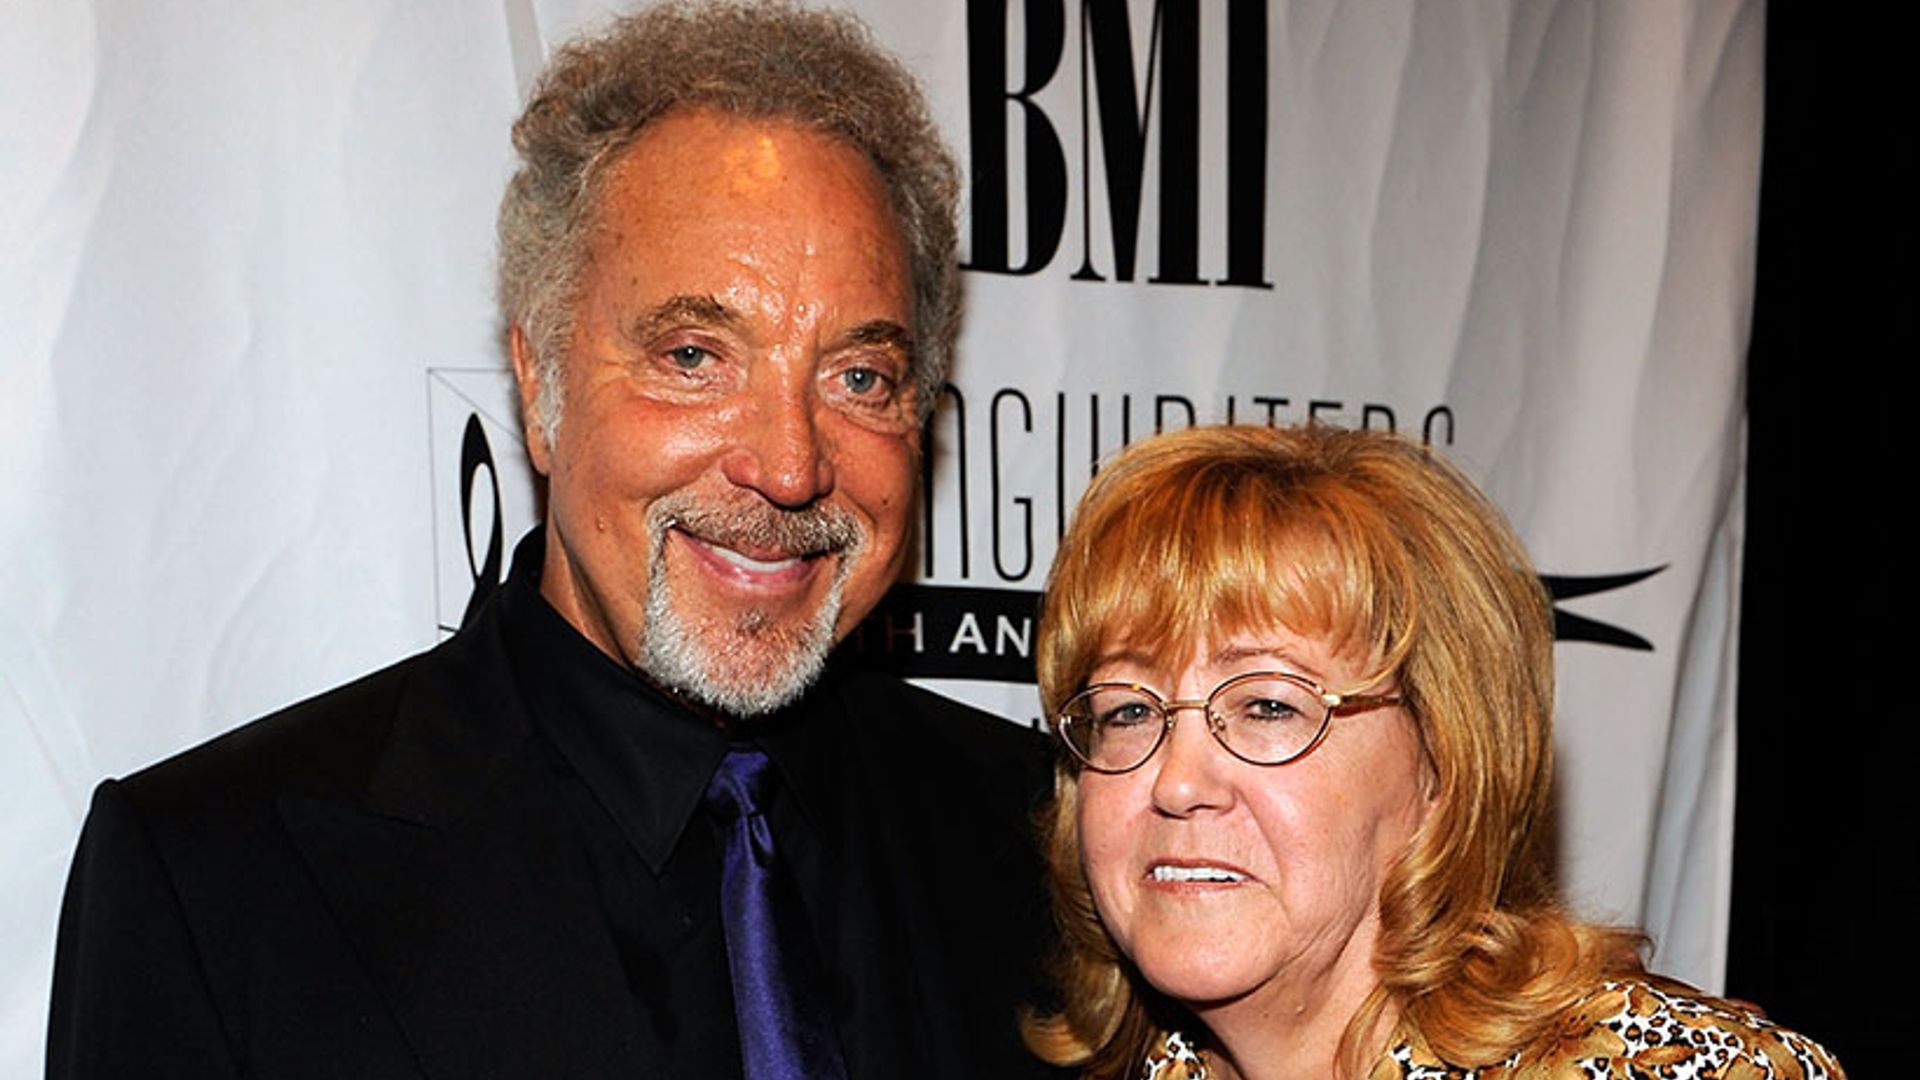 Tom Jones reveals late wife Linda would have been 'thrilled' with his return on The Voice